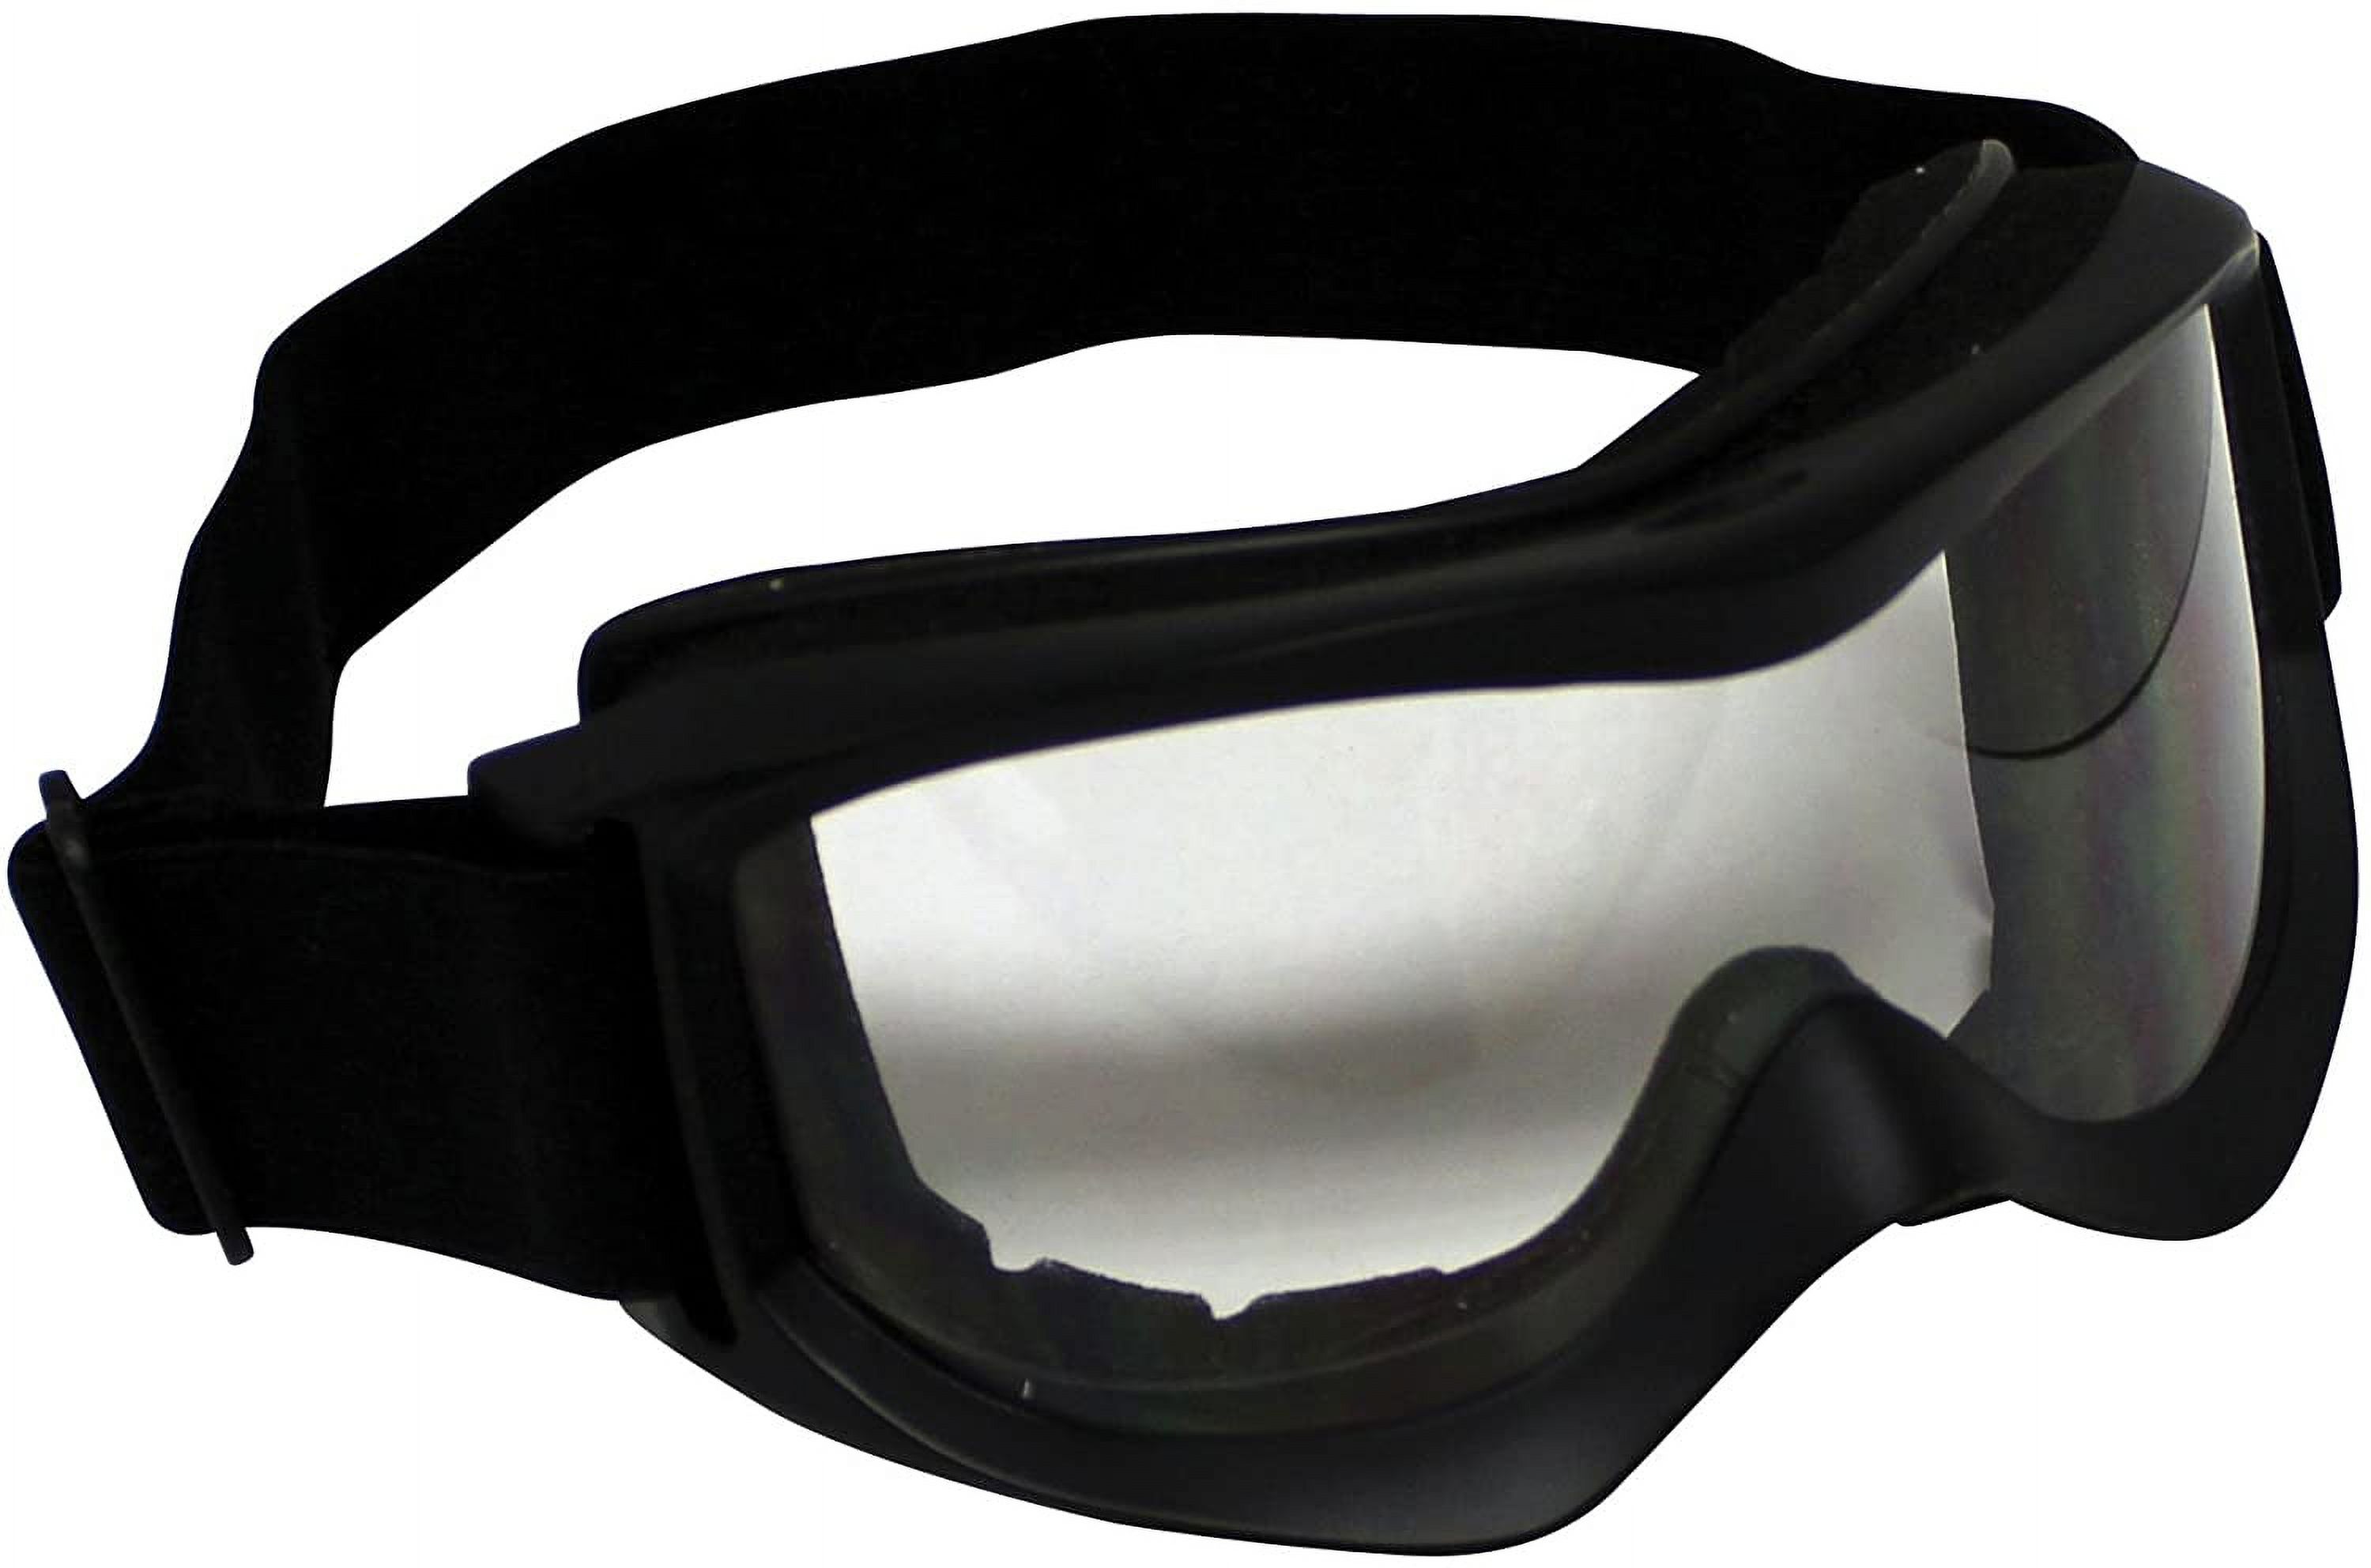 Coleman® All-Terrain Vehicle Adjustable Protective Goggles, Black - image 3 of 4